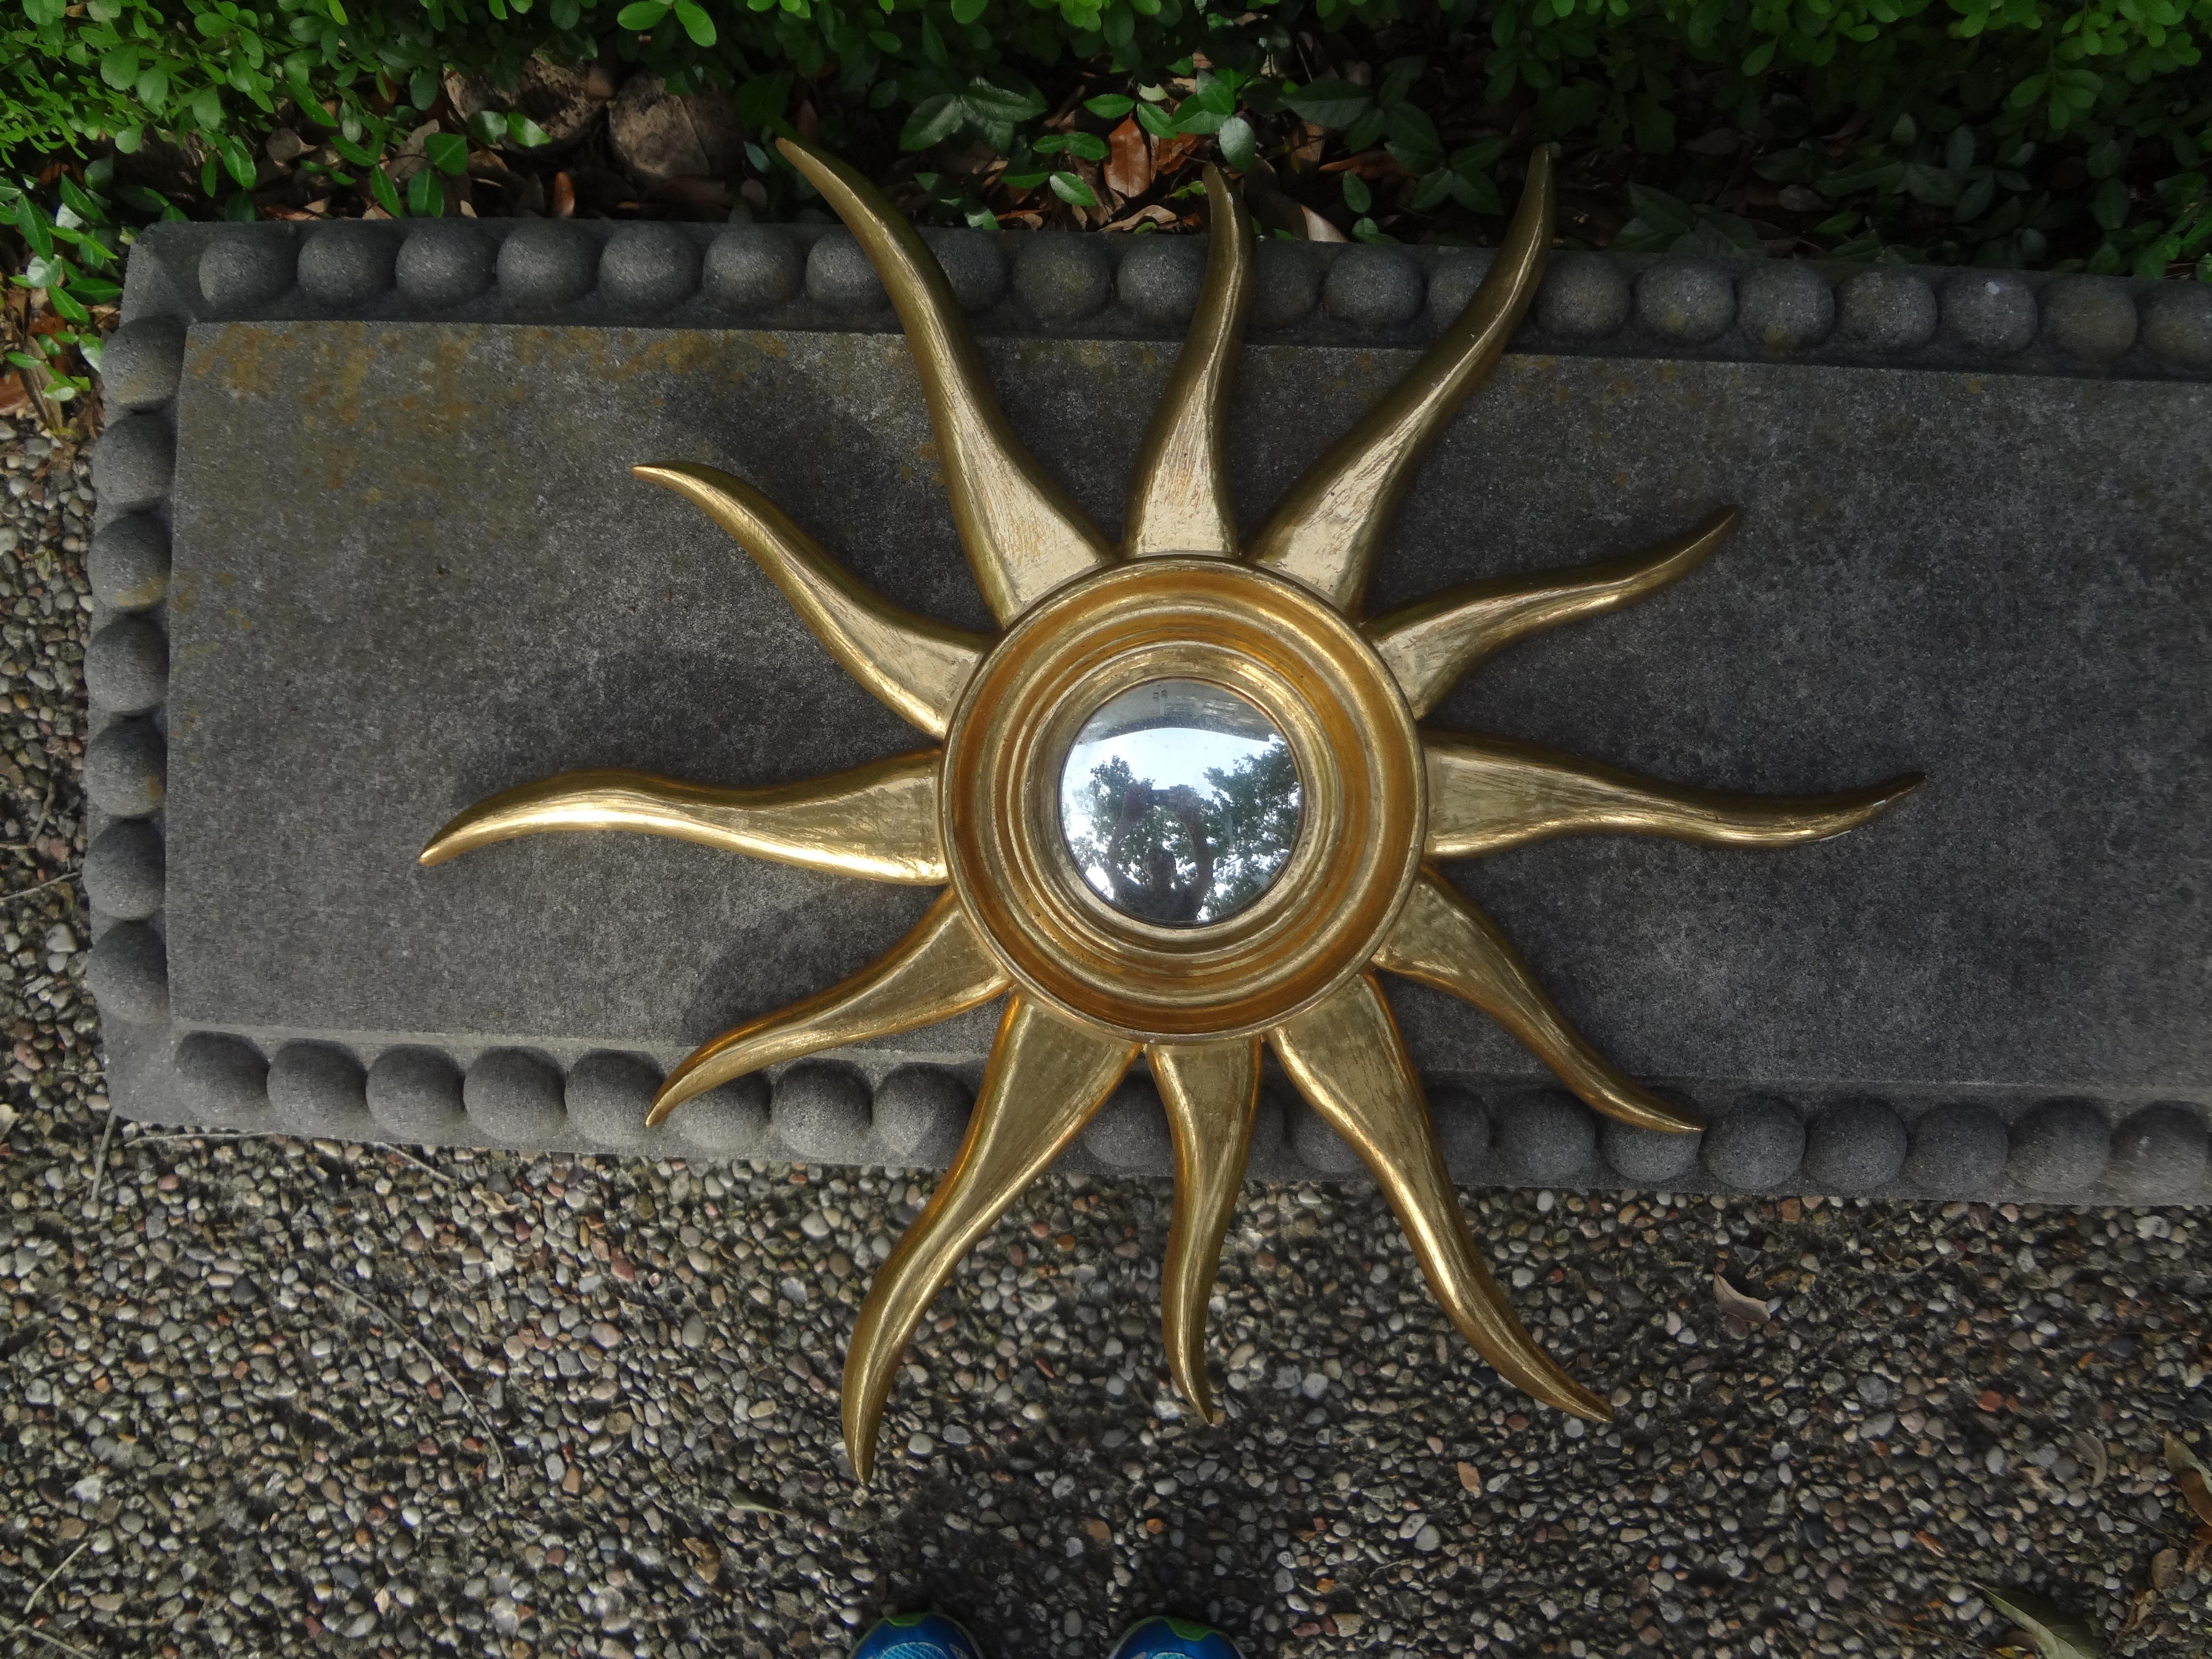 Stunning mid-century Italian sunburst convex mirror. This listing is for a beautiful vintage Italian water gilt sunburst mirror with a convex center. Overall dimensions-21 inches. Convex mirror center- 3.5 inches. Fabulous when displayed in a